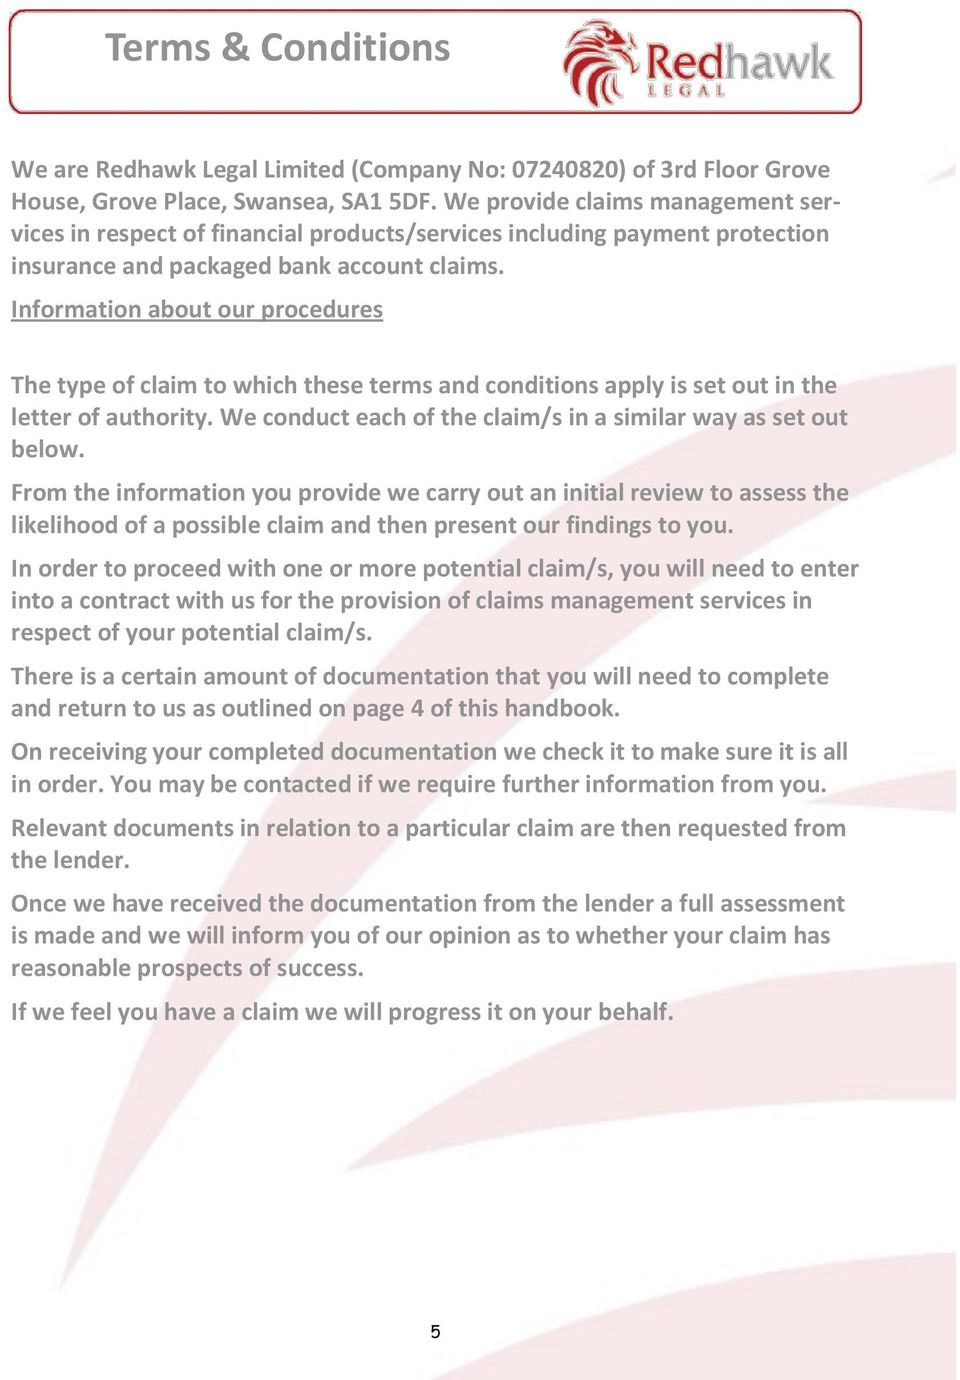 Information about our procedures The type of claim to which these terms and conditions apply is set out in the letter of authority. We conduct each of the claim/s in a similar way as set out below.